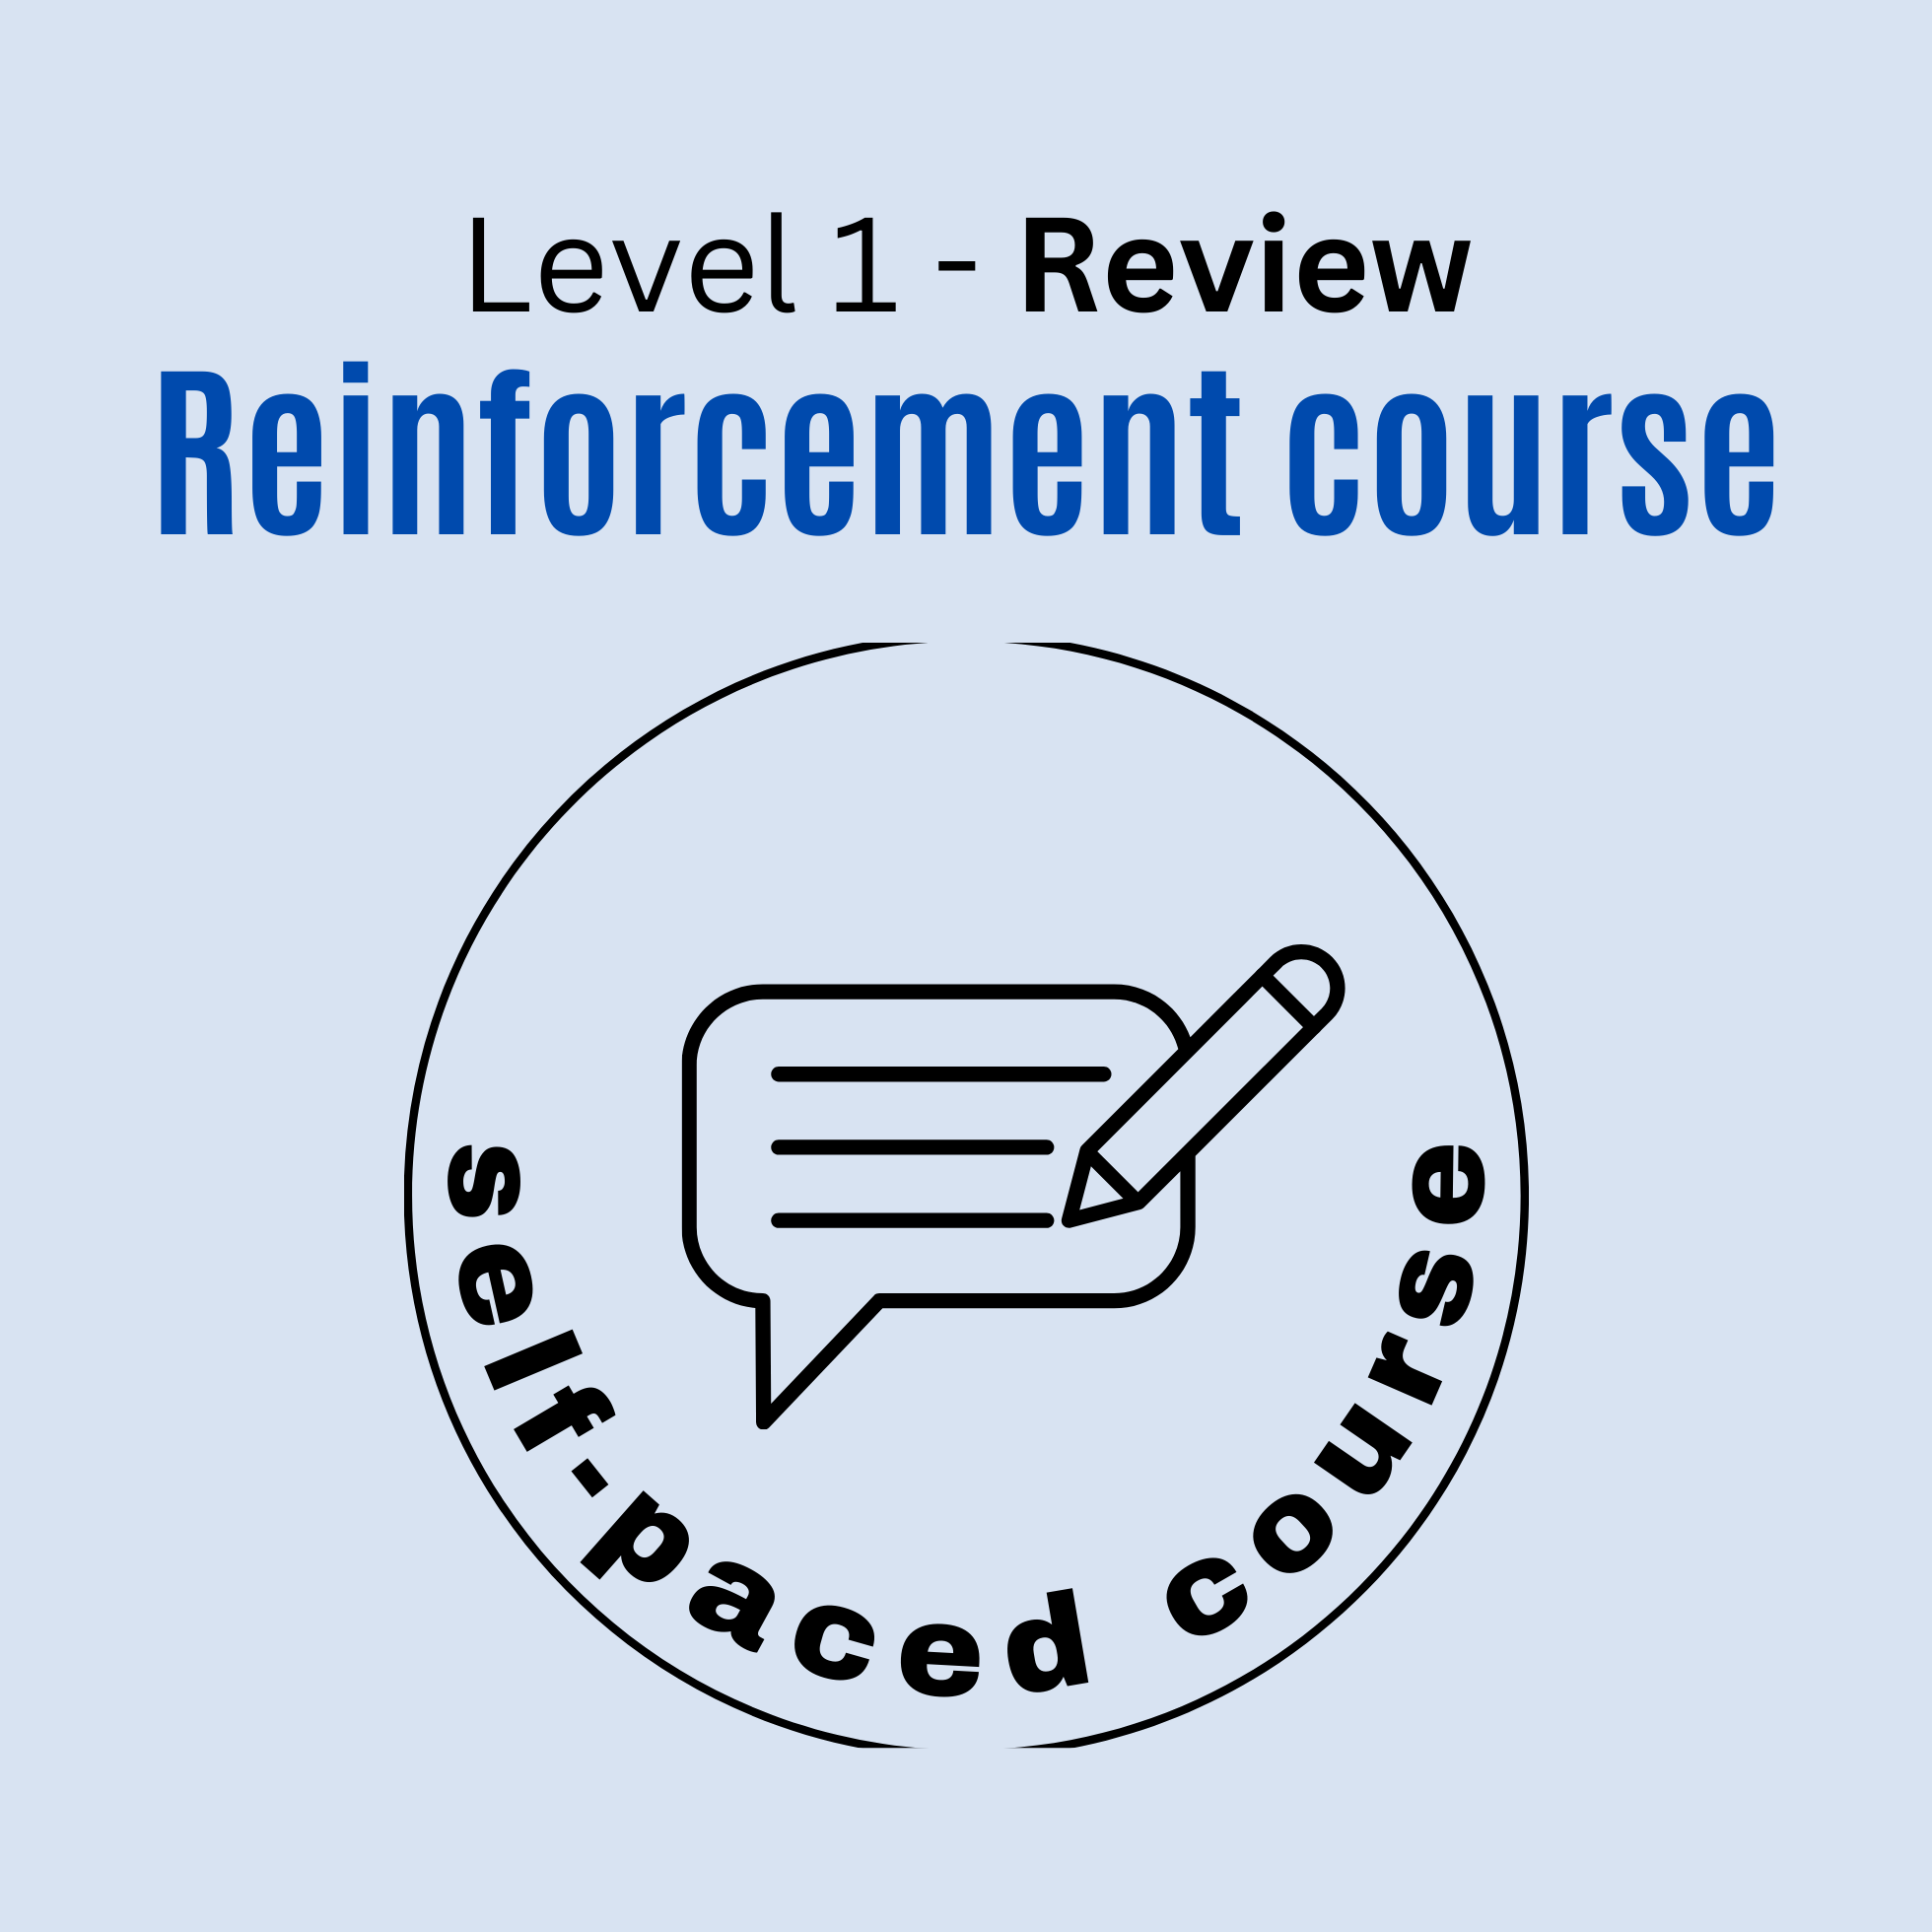 Level 1 Foundation Course Review